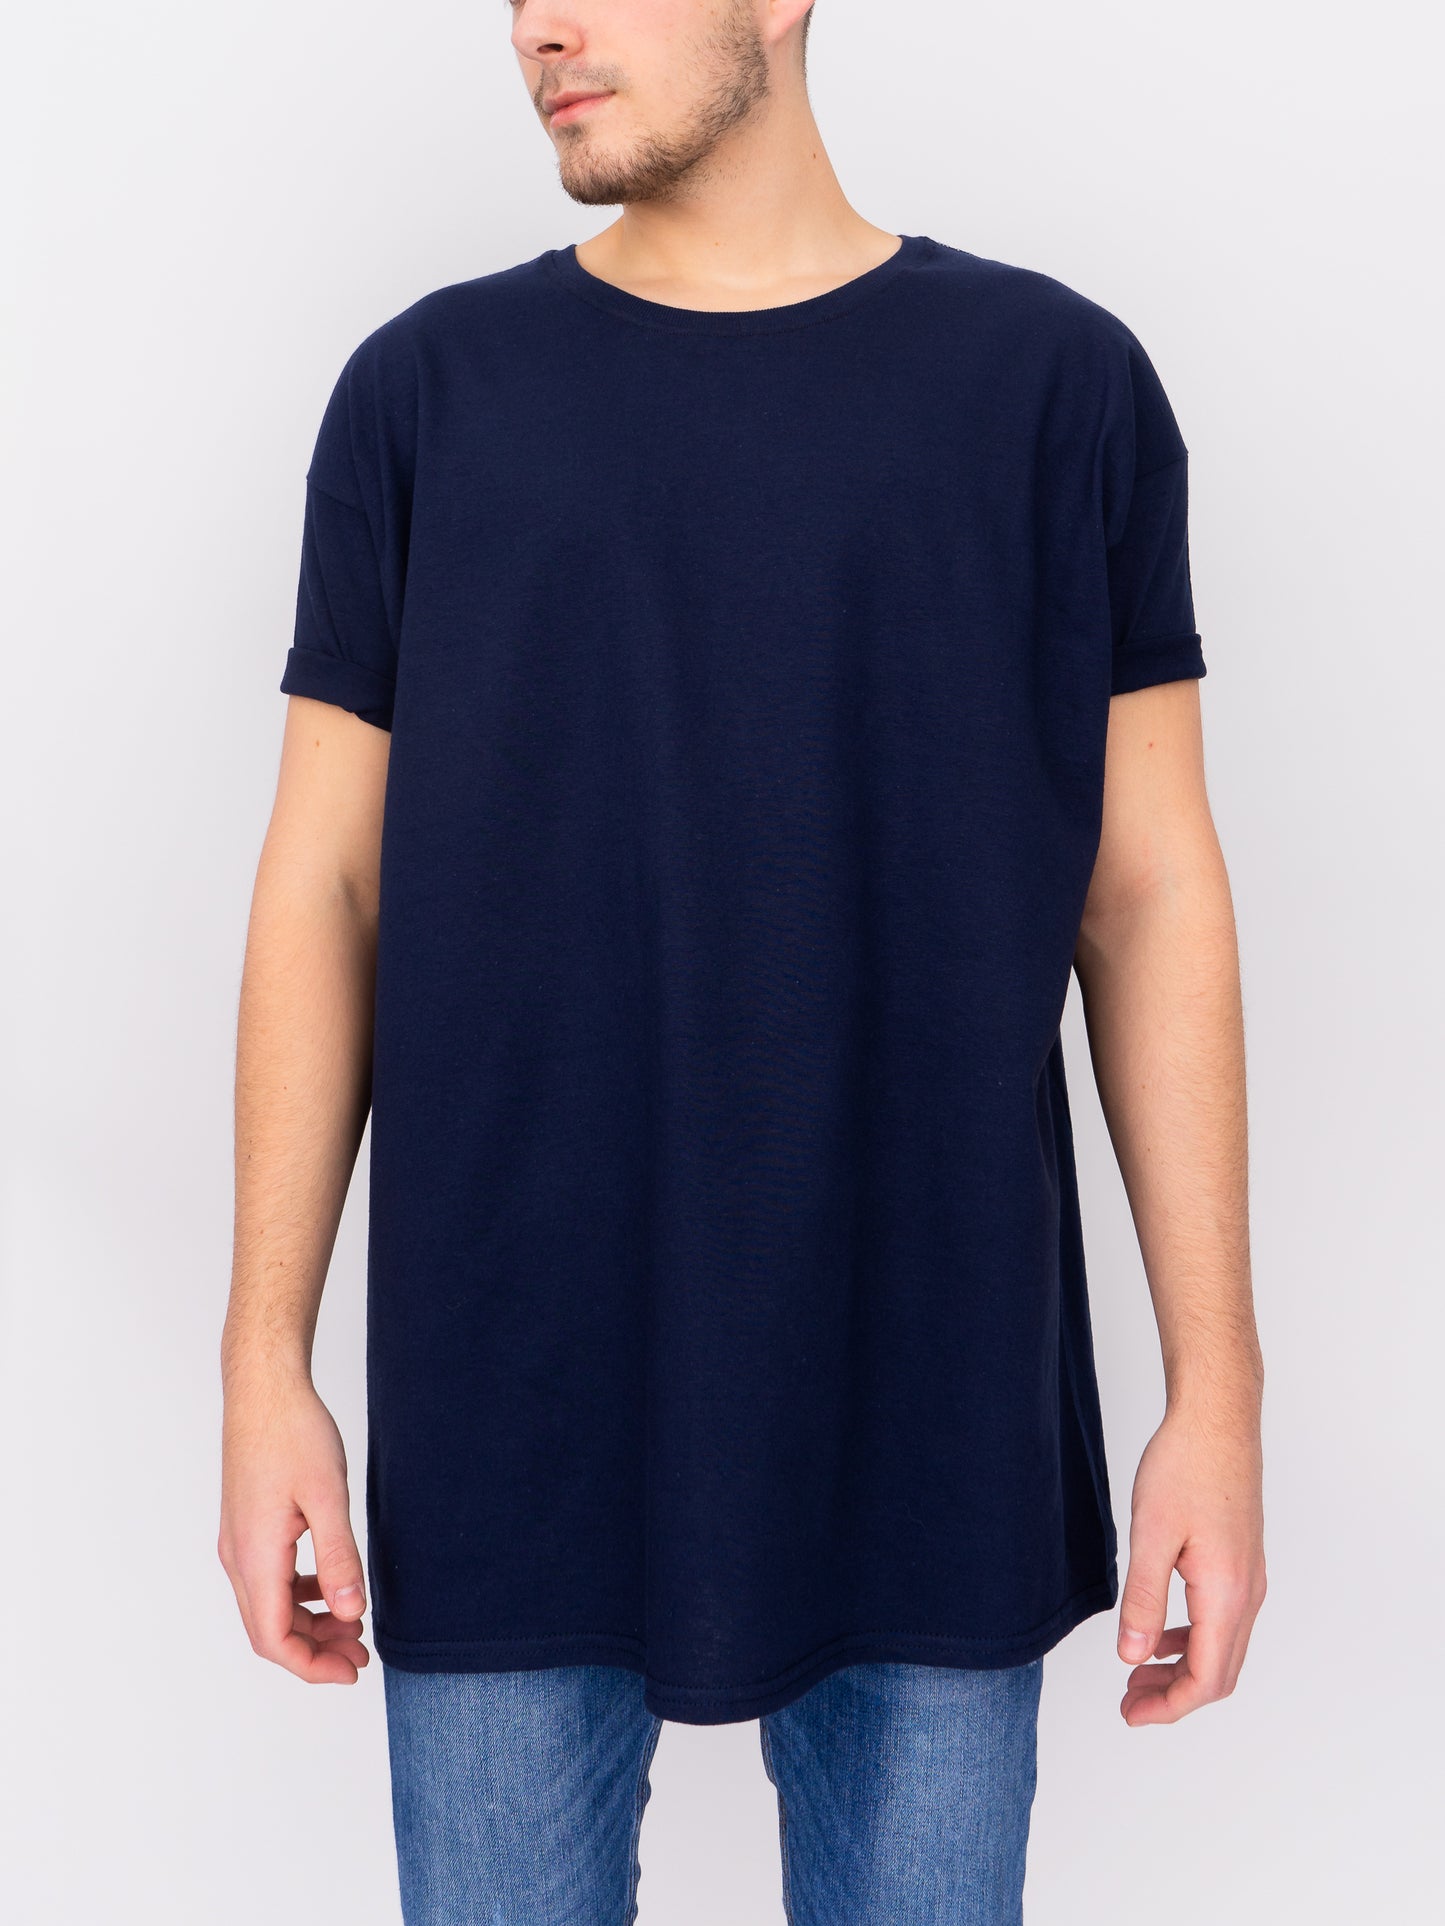 Oversize T-Shirt in Navy Blue - DEEP Clothing